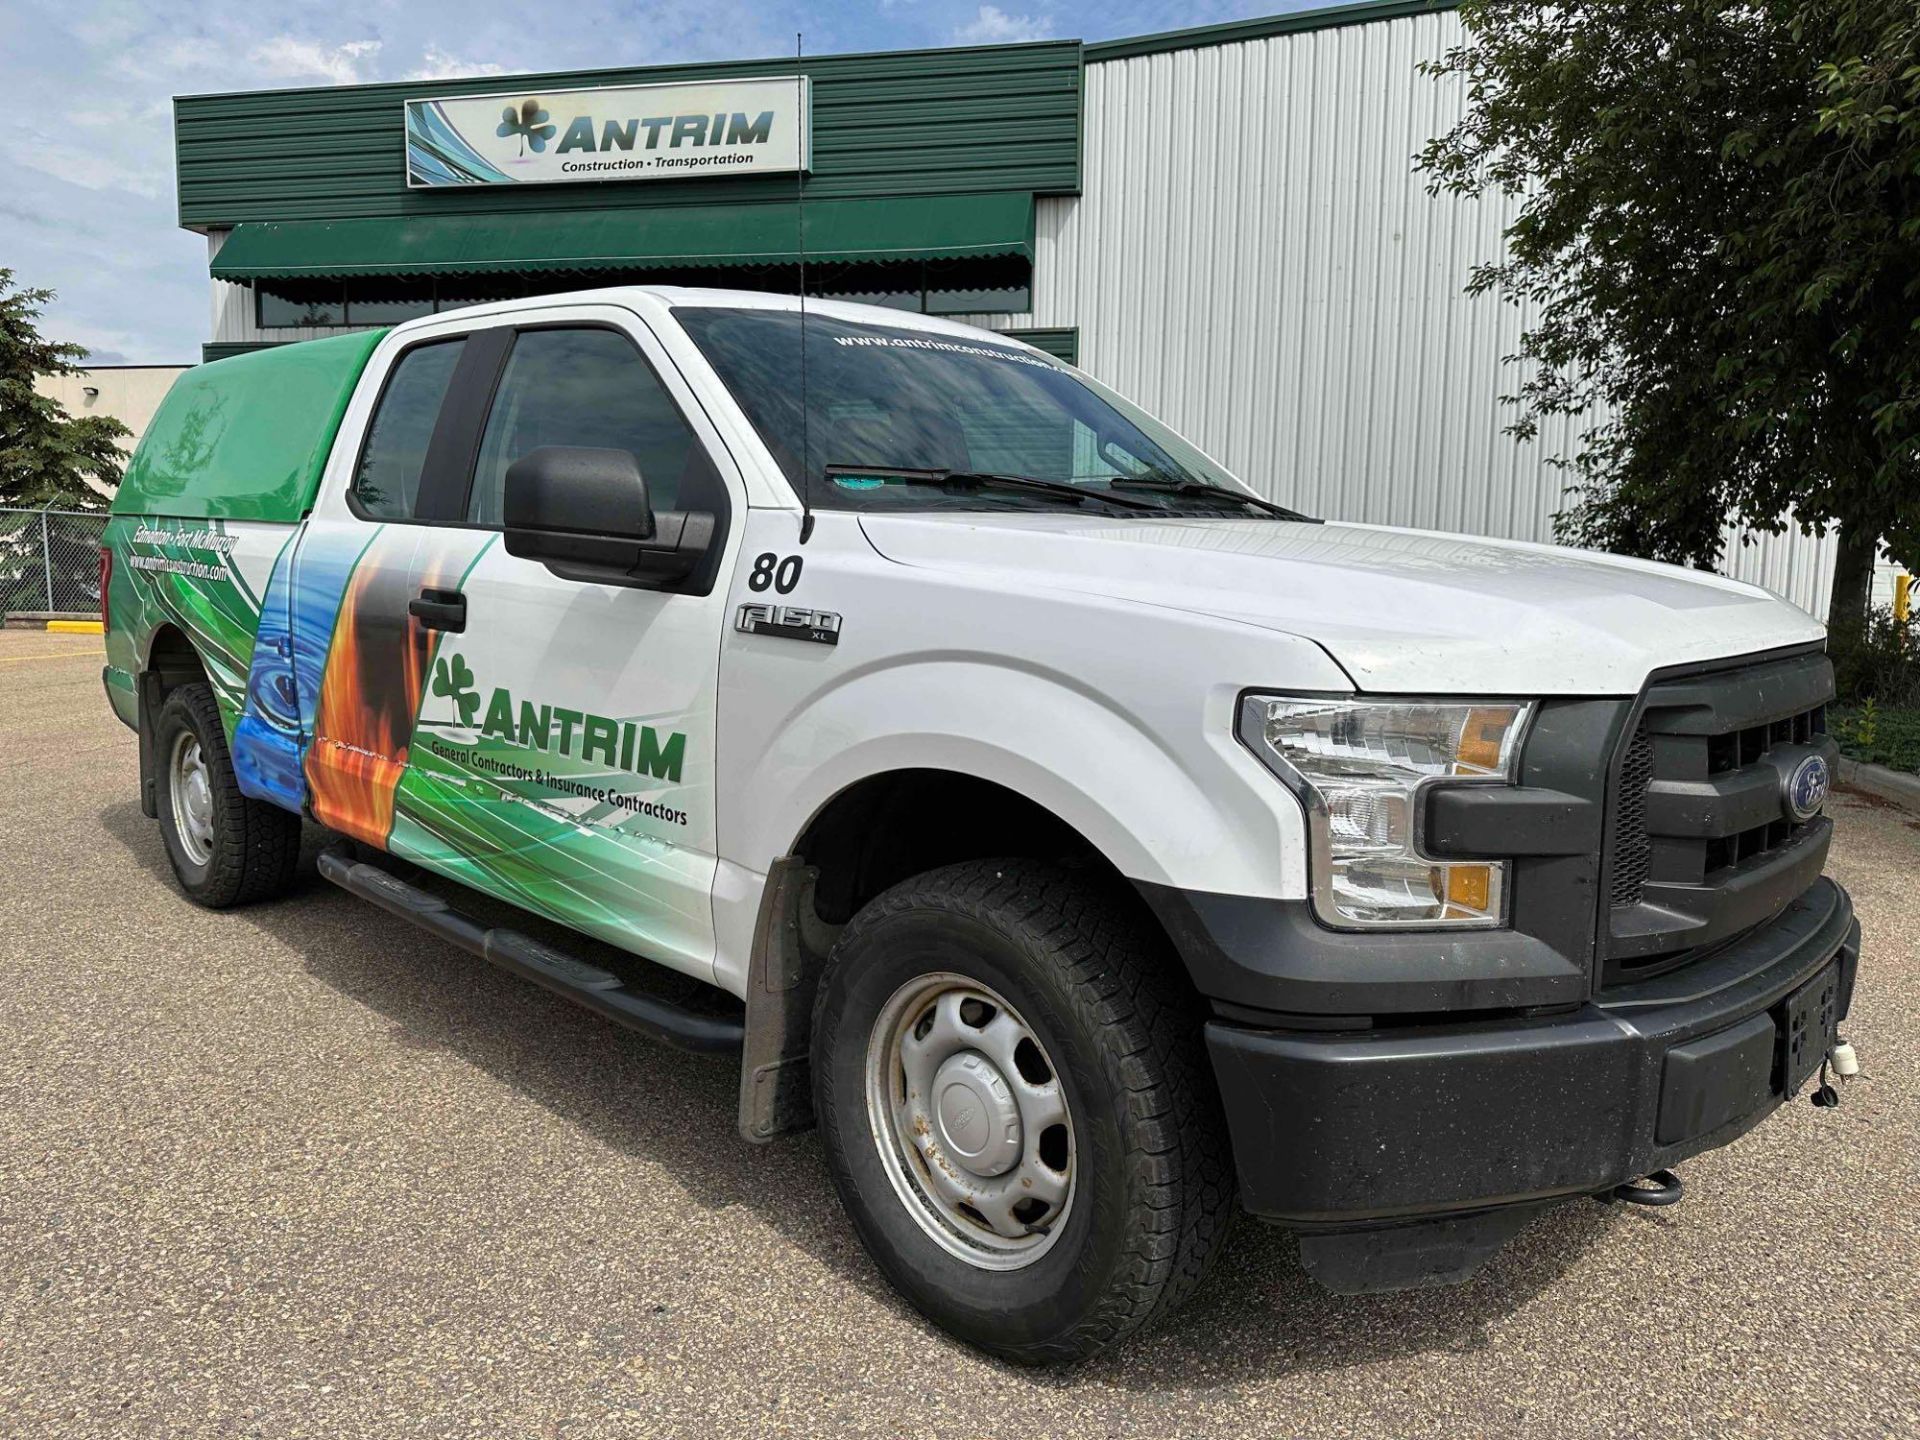 2016 Ford F-150 4x4 XL Extended Cab Pickup Truck, 139,578 kms showing, VIN: 1FTEX1E89GFD05297